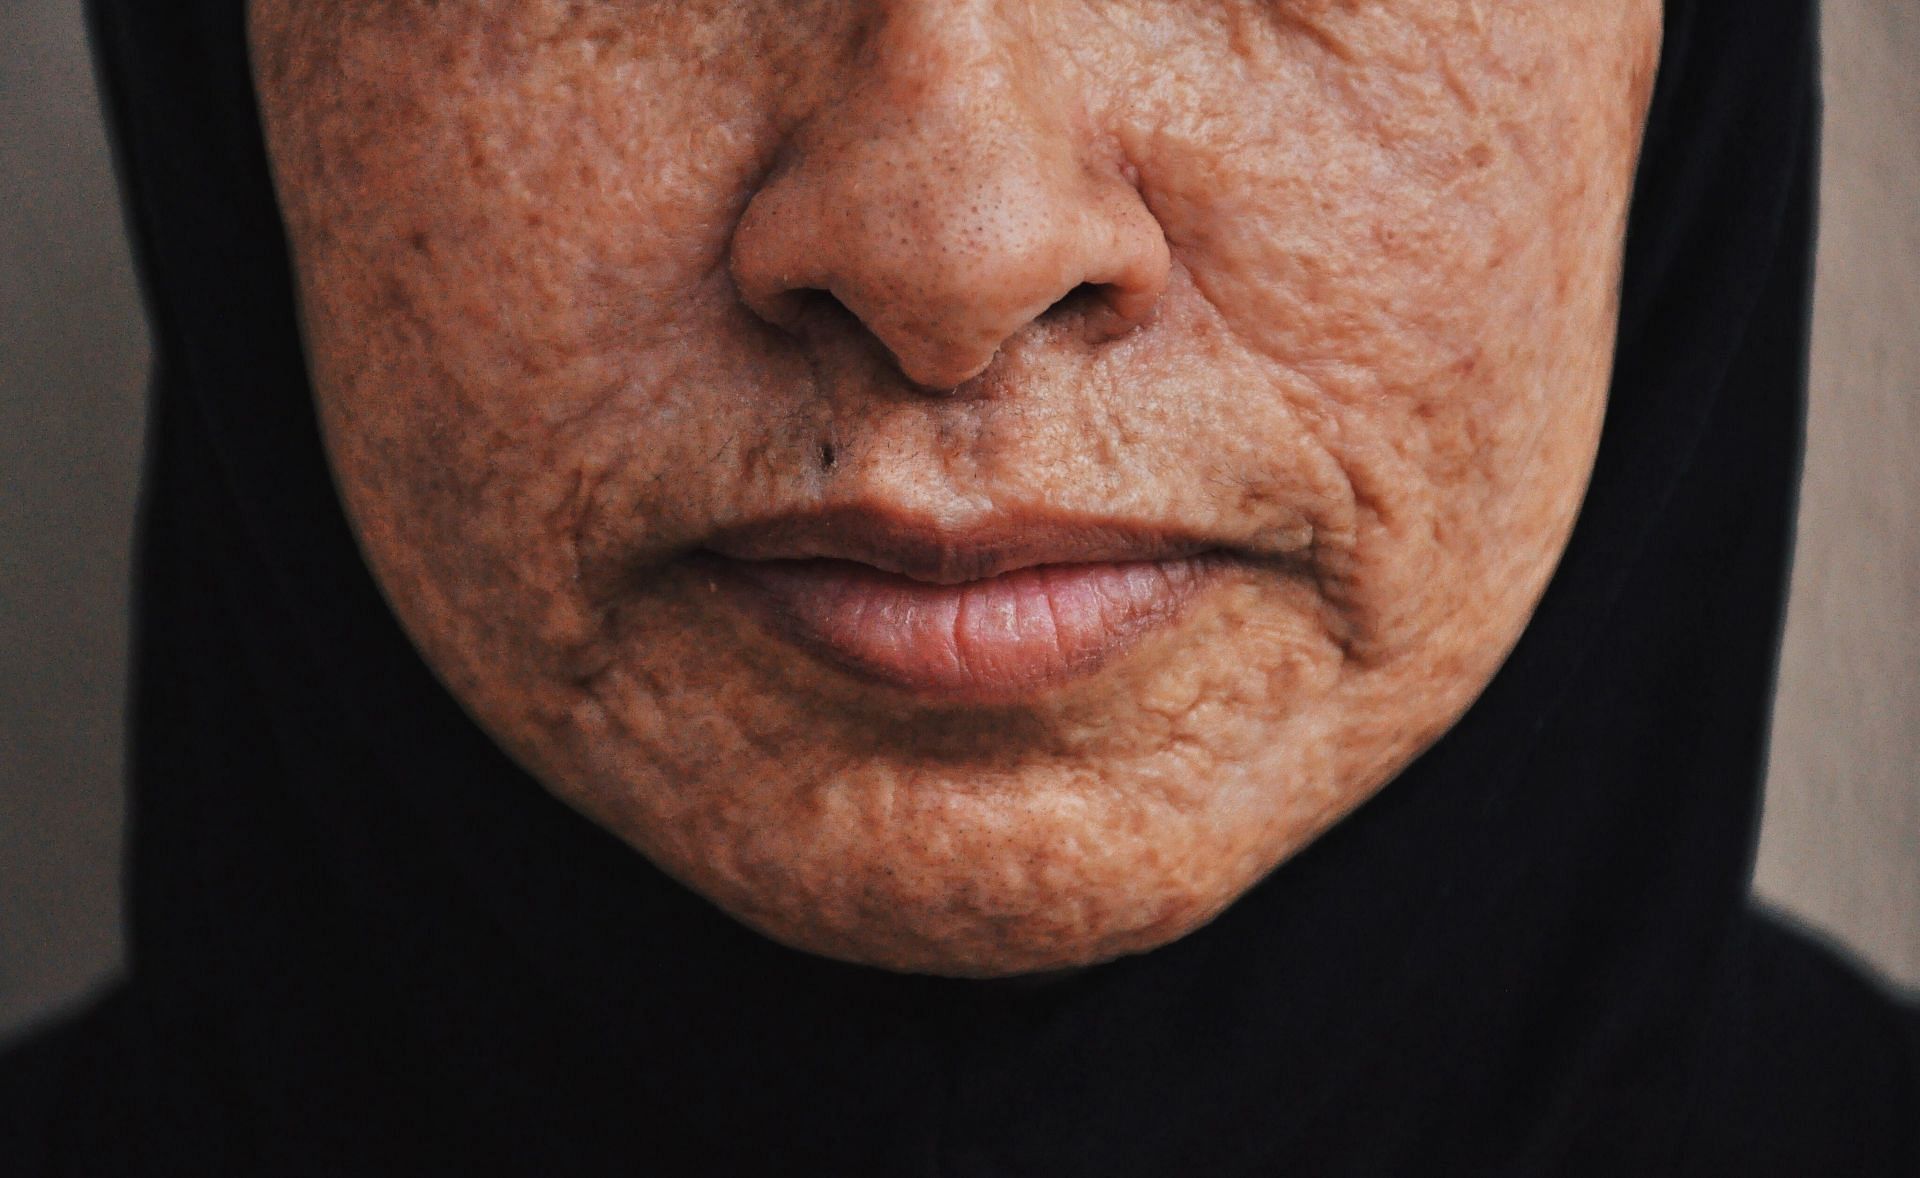  Reverse ageing to look younger  (image sourced via Pexels / Photo by andy)